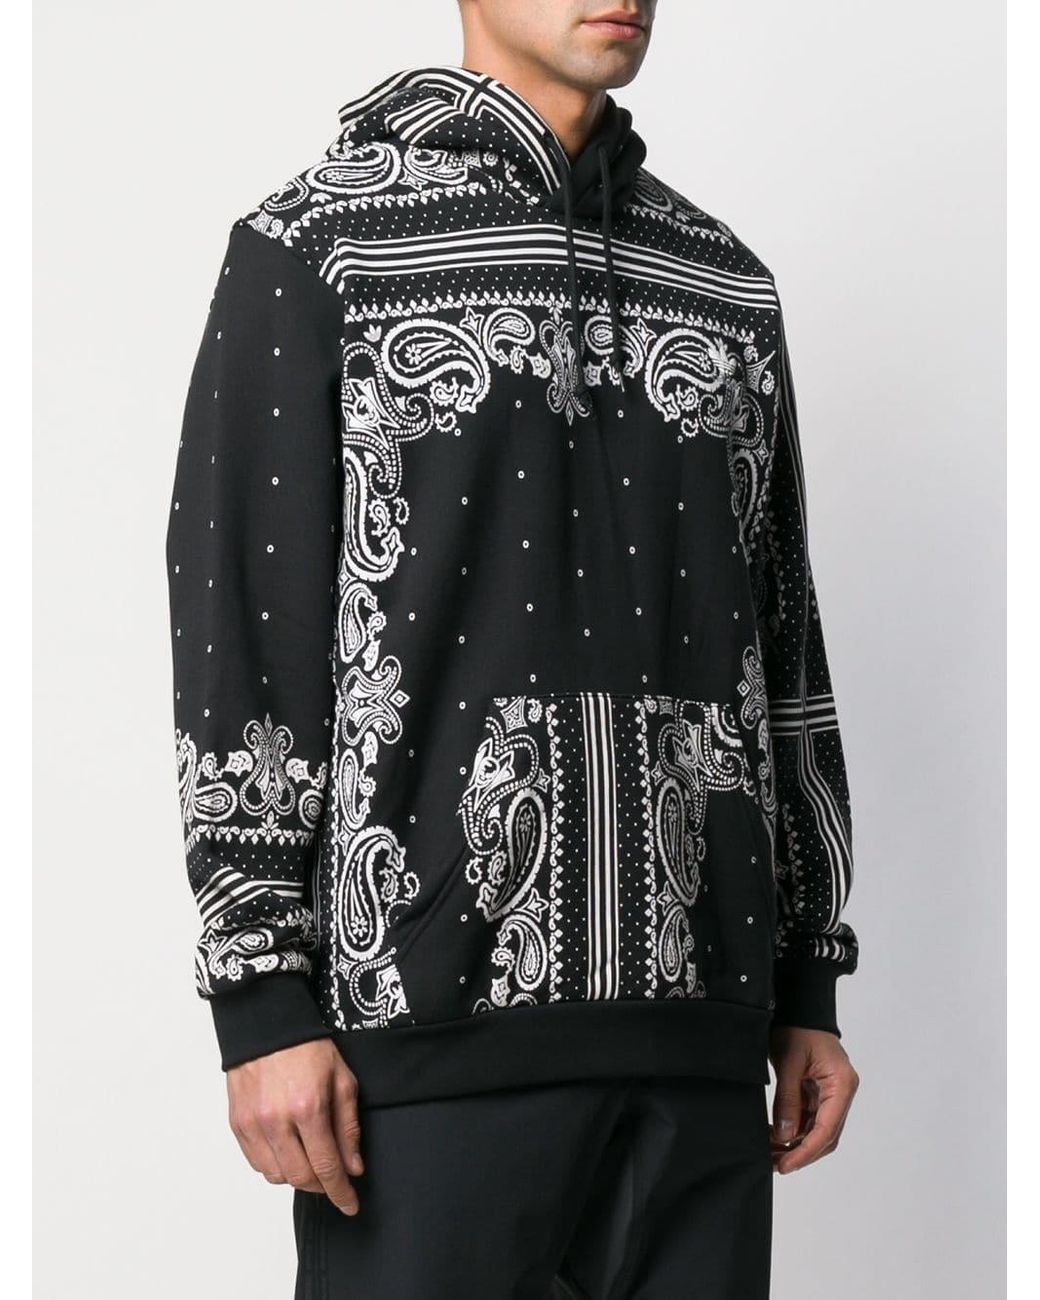 adidas Cotton Paisley Print Hoodie in Black for Men | Lyst